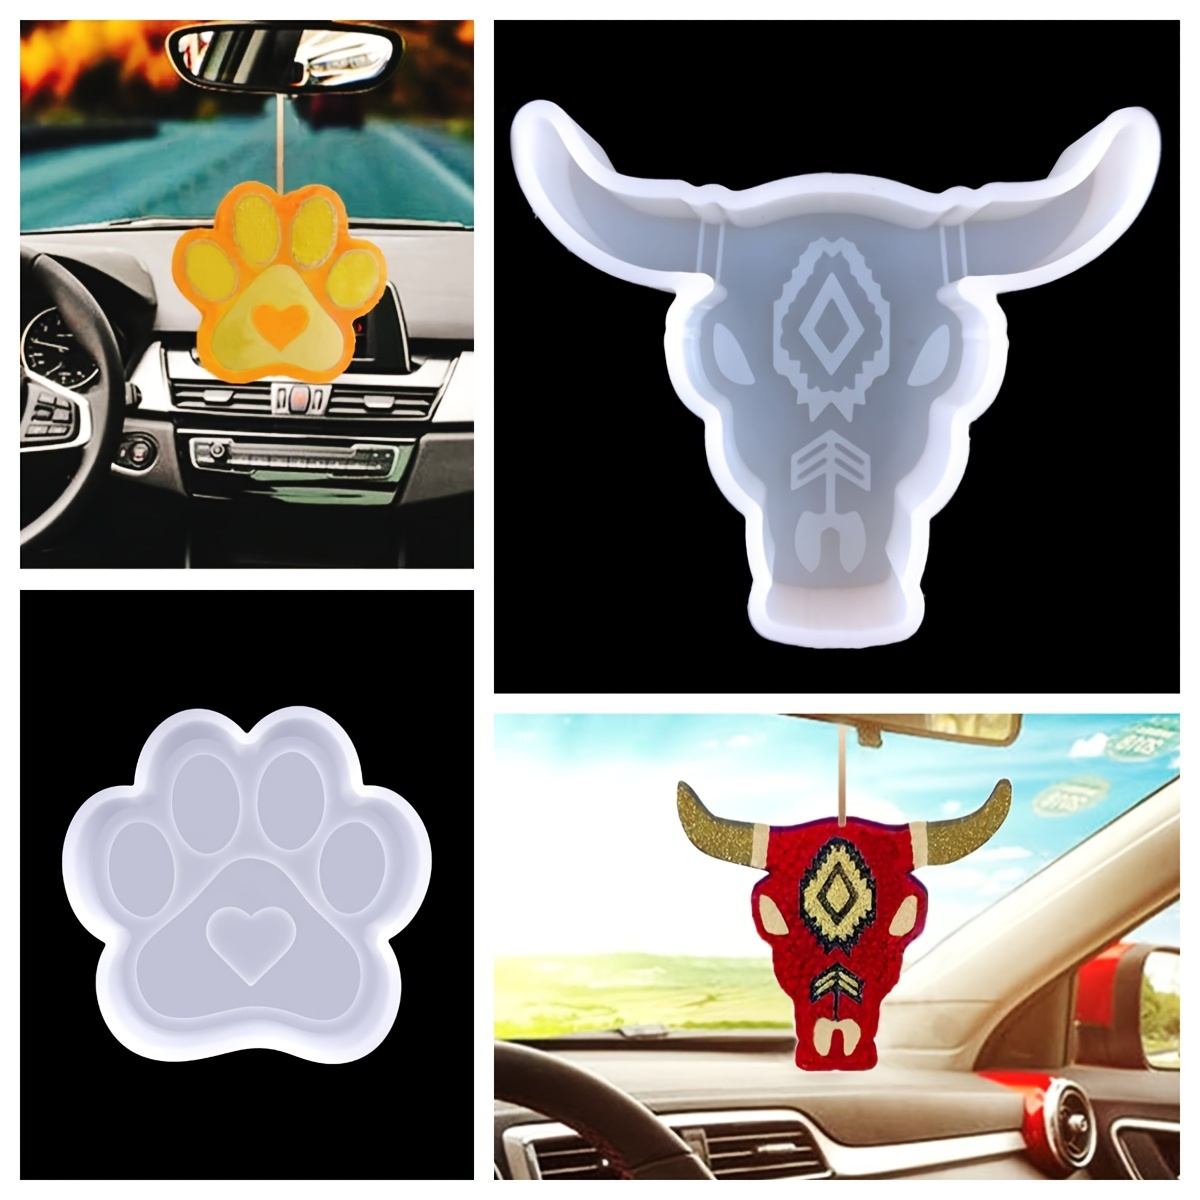 Chach Co Horse Head Freshie Molds - Car Freshie Molds, Silicone Freshie Molds | Easy to Clean, Thick Car Freshie Silicone Molds | 4.5 x 3.8 Soap Molds